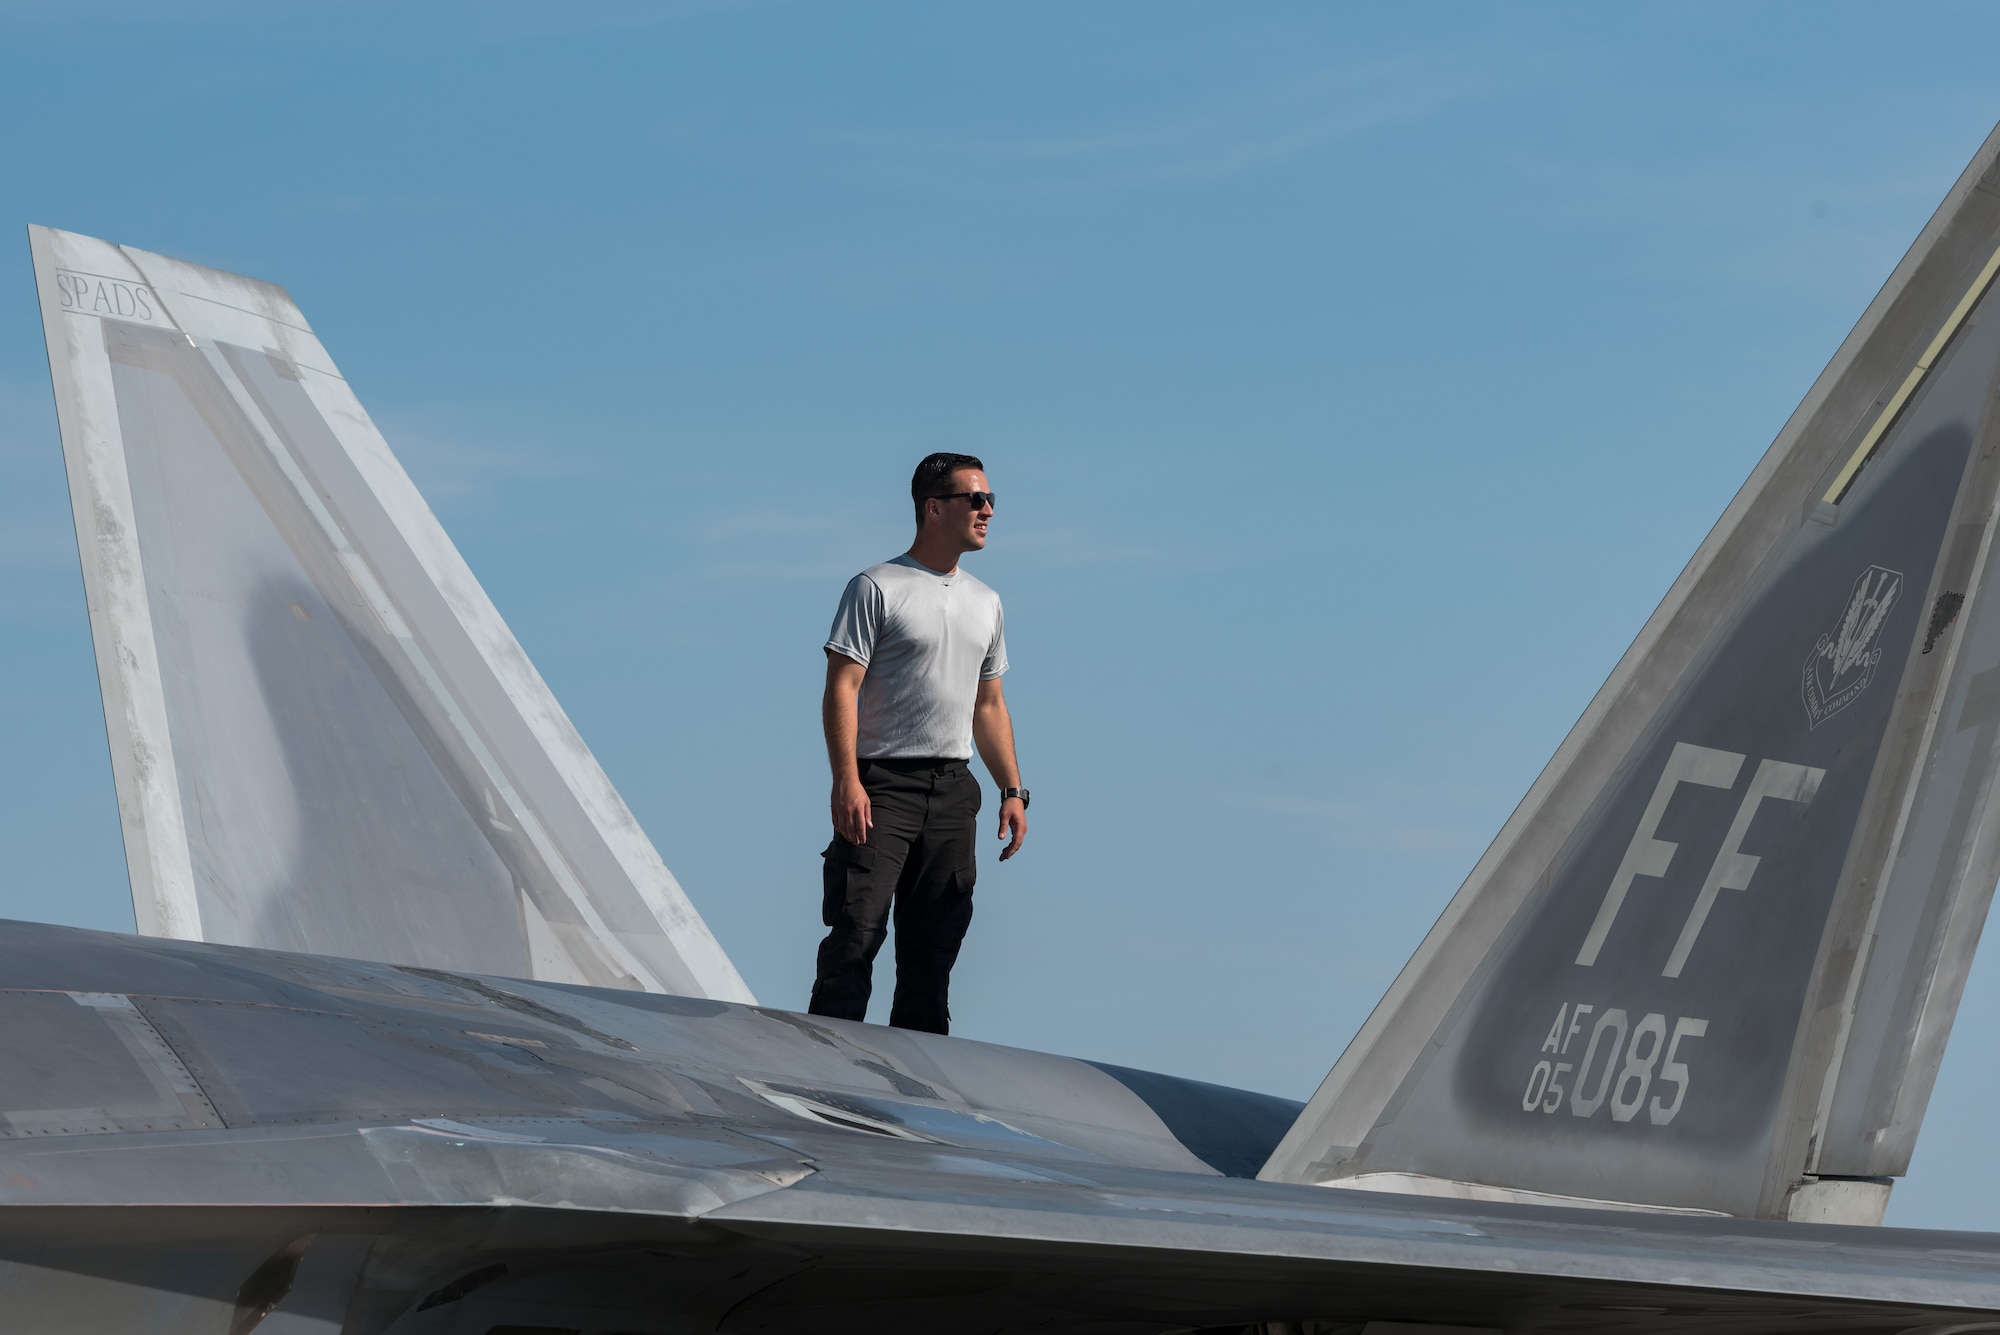 Staff Sgt. Zach Zistl, F-22 Raptor dedicated crew chief, performs a postflight inspection Sept. 12, 2019, at Dover Air Force Base, Del. Zistl, a member of the F-22 demonstration team from Joint Base Langley-Eustis, Va., arrived here for the Thunder Over Dover 2019 open house and air show. (U.S. Air Force photo by Roland Balik)